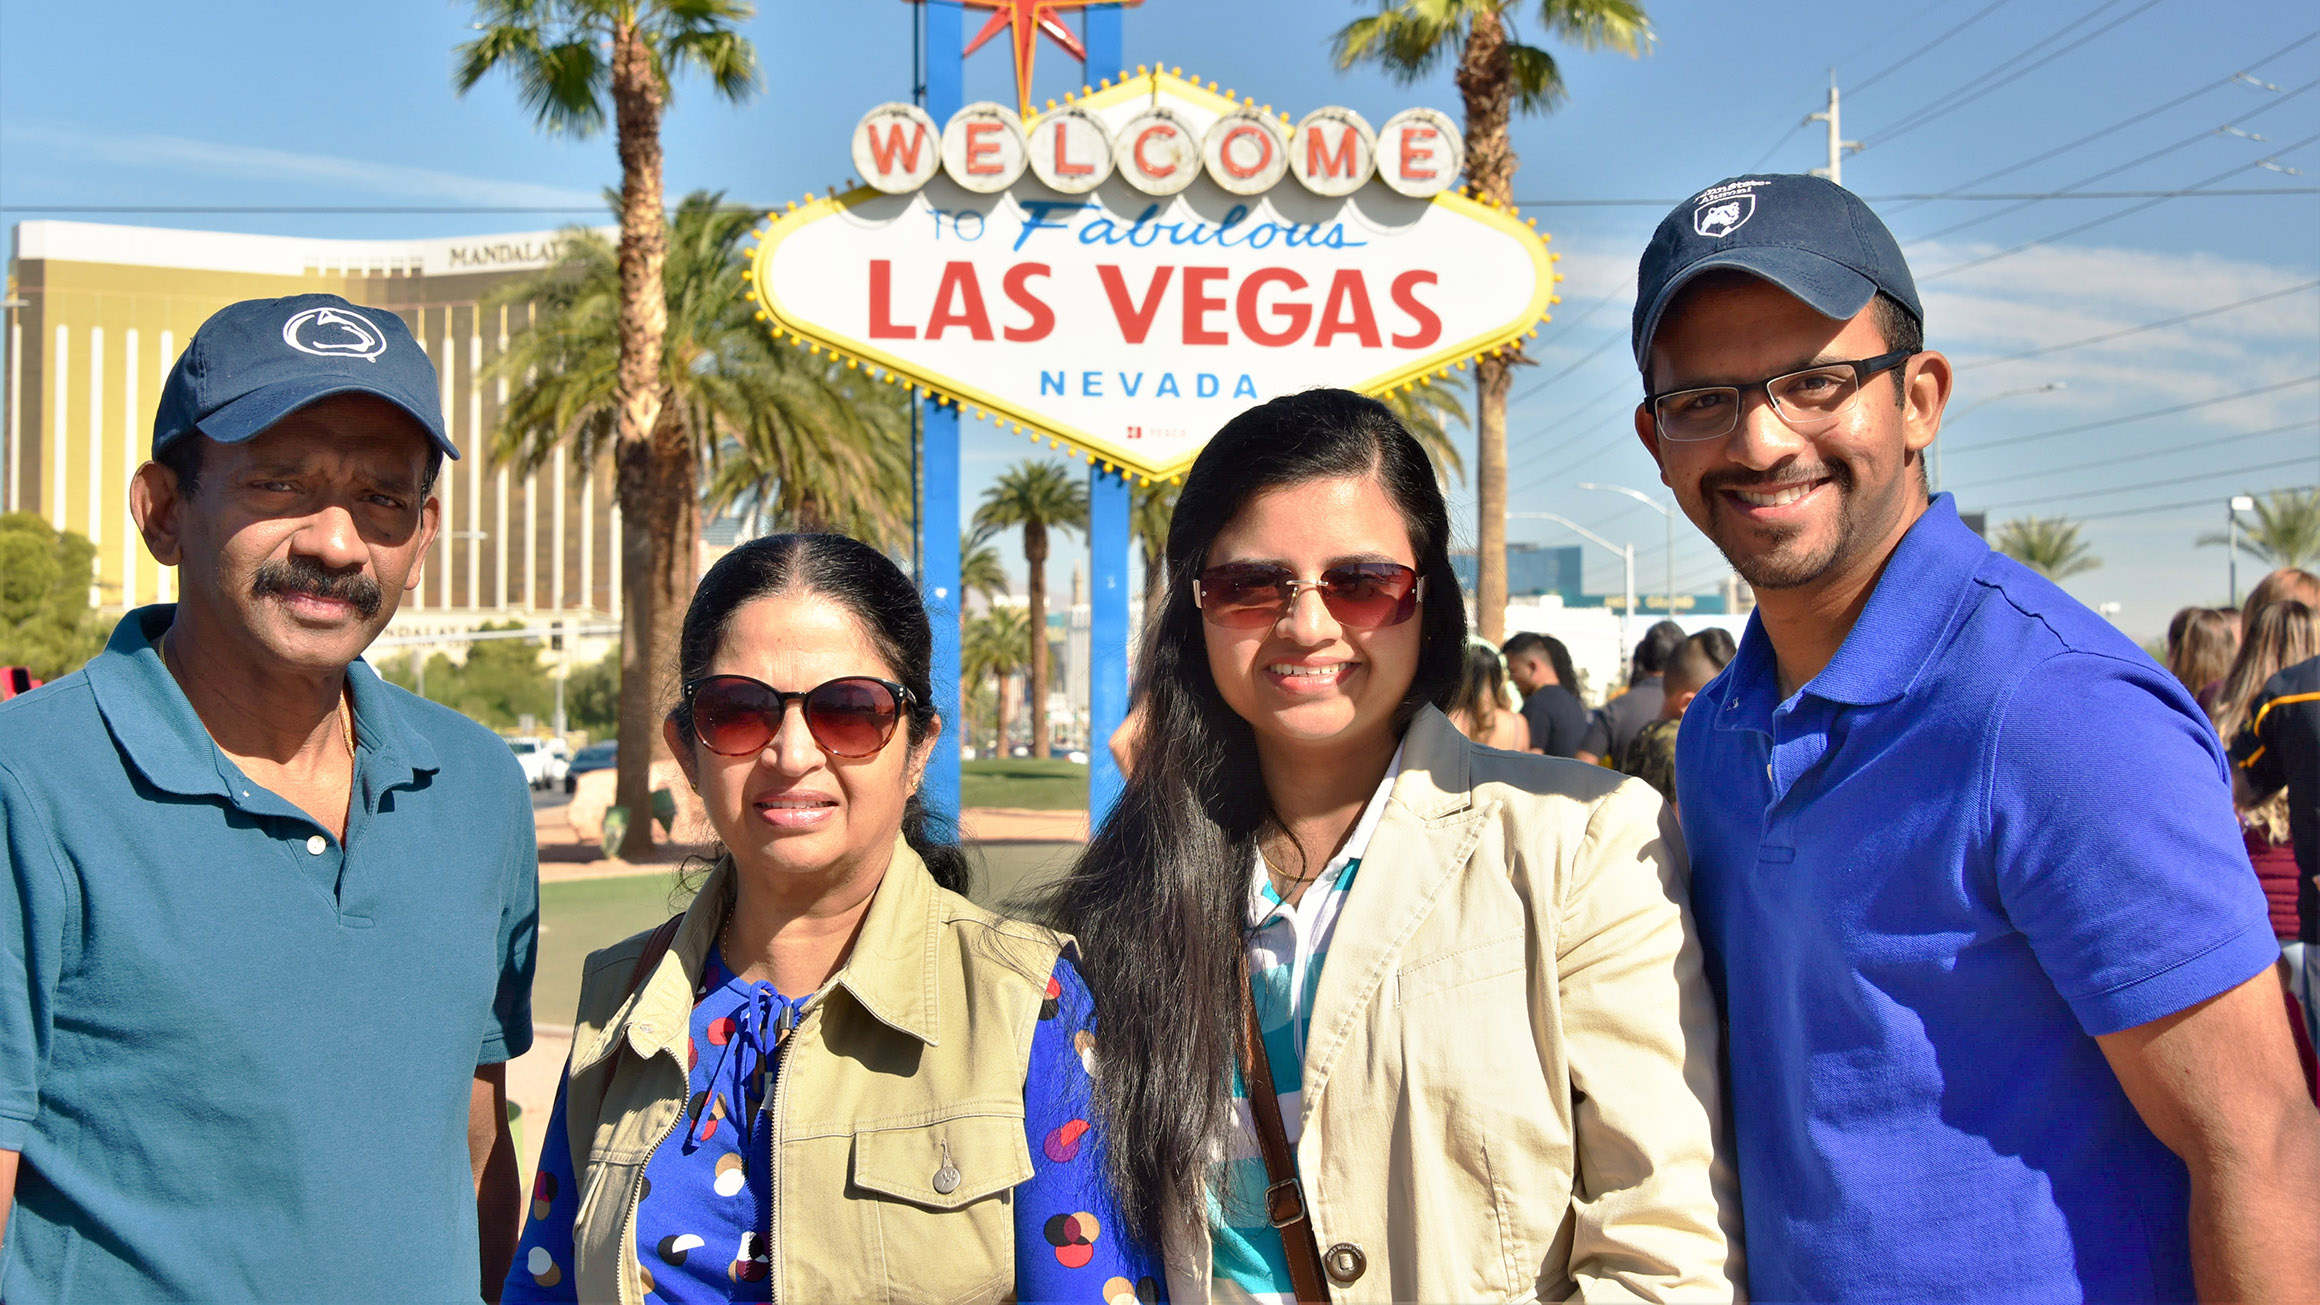 Pavara Ranatunga stands with his mother, sister and father to the right him while while they pose with a Las Vegas sign in the background flanked by palm trees.